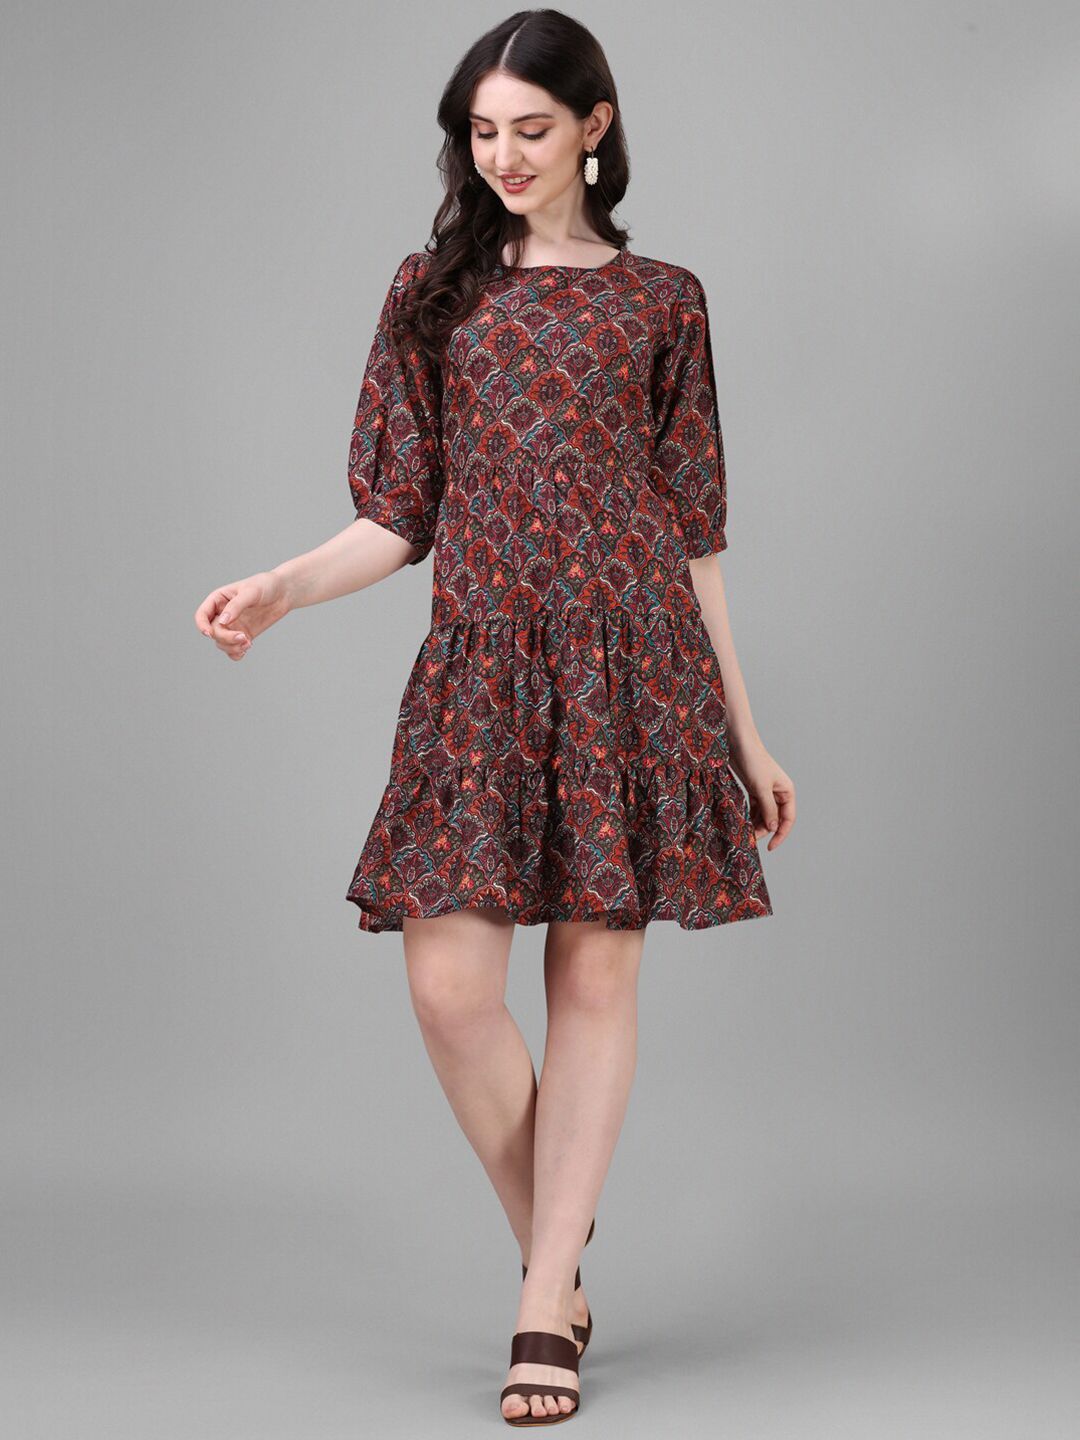 Kinjo Ethnic Motifs Printed A-Line Dress Price in India